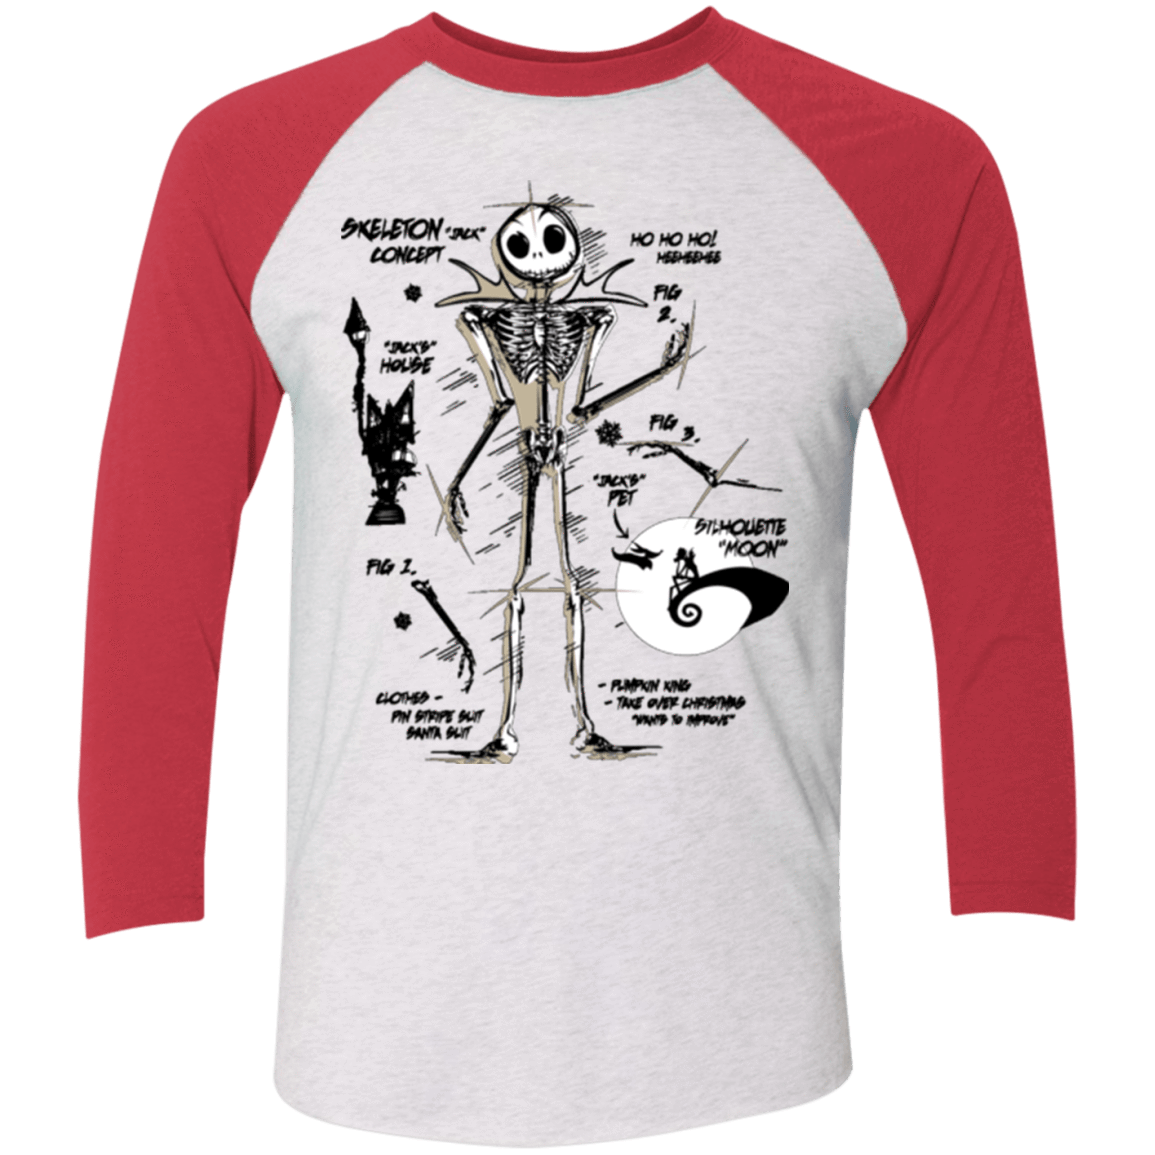 T-Shirts Heather White/Vintage Red / X-Small Skeleton Concept Men's Triblend 3/4 Sleeve